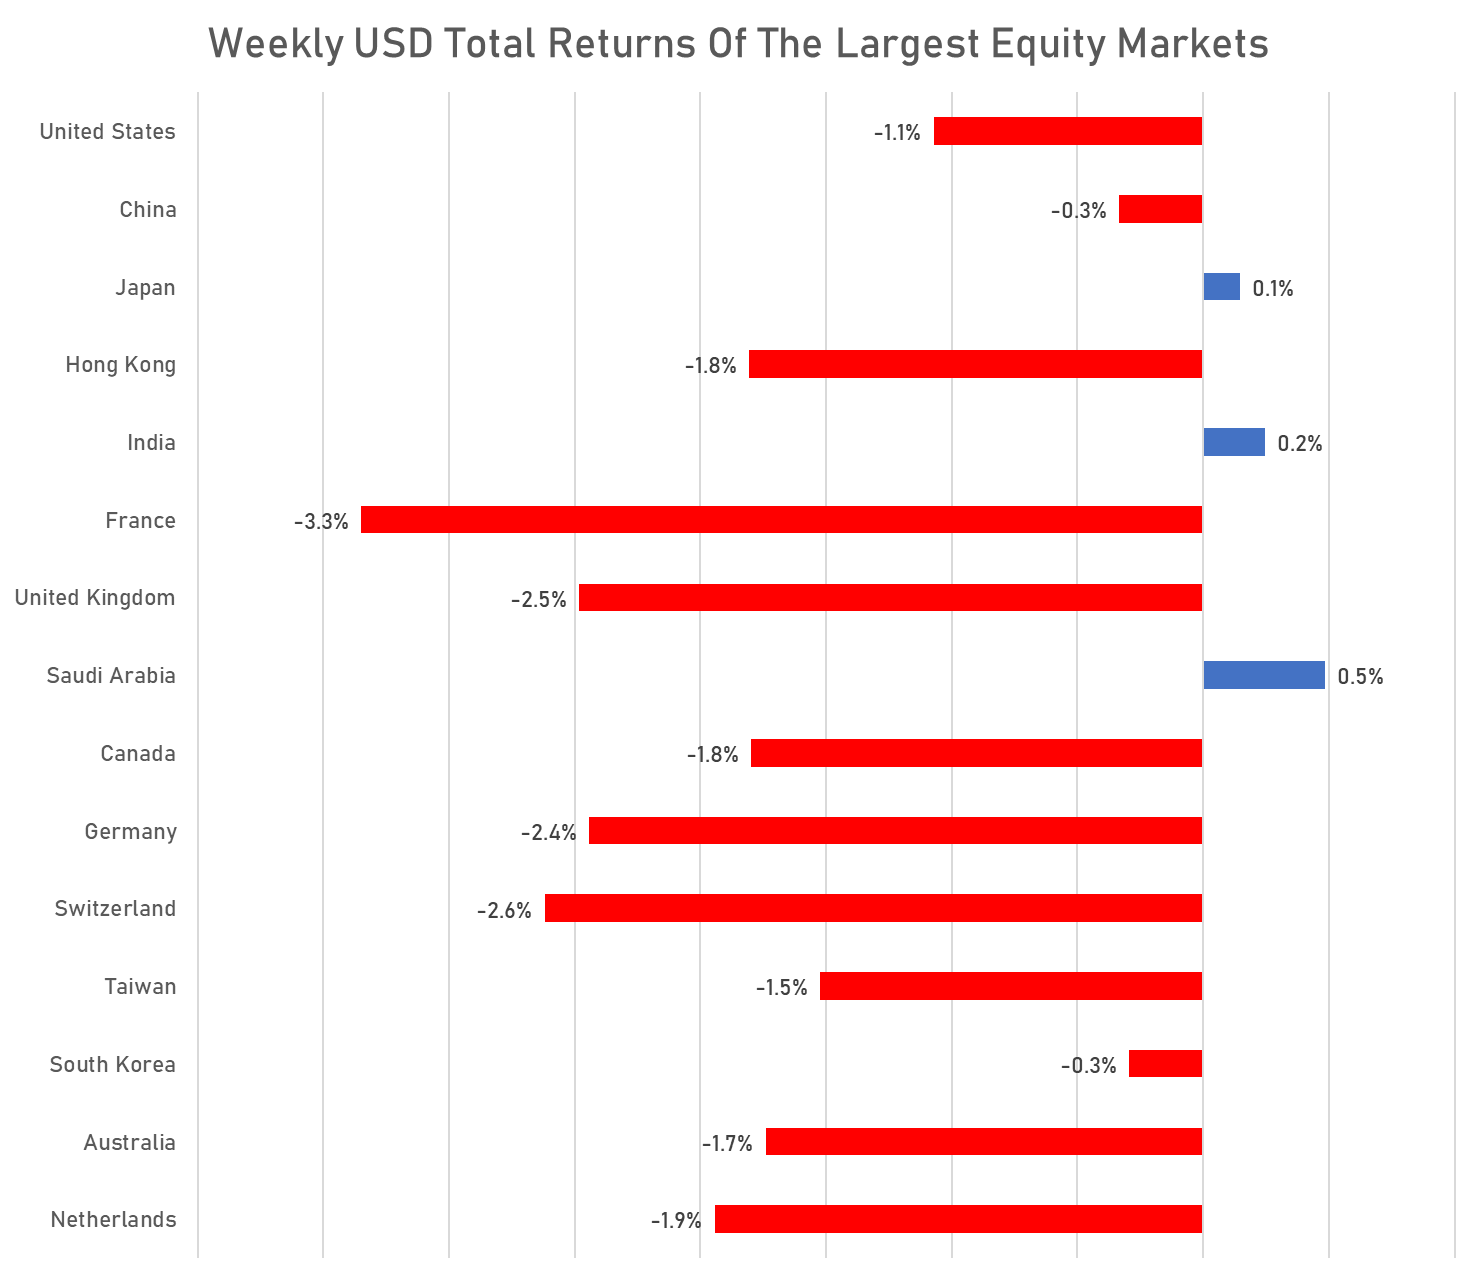 Weekly USD Total returns | Sources: phipost.com, FactSet data